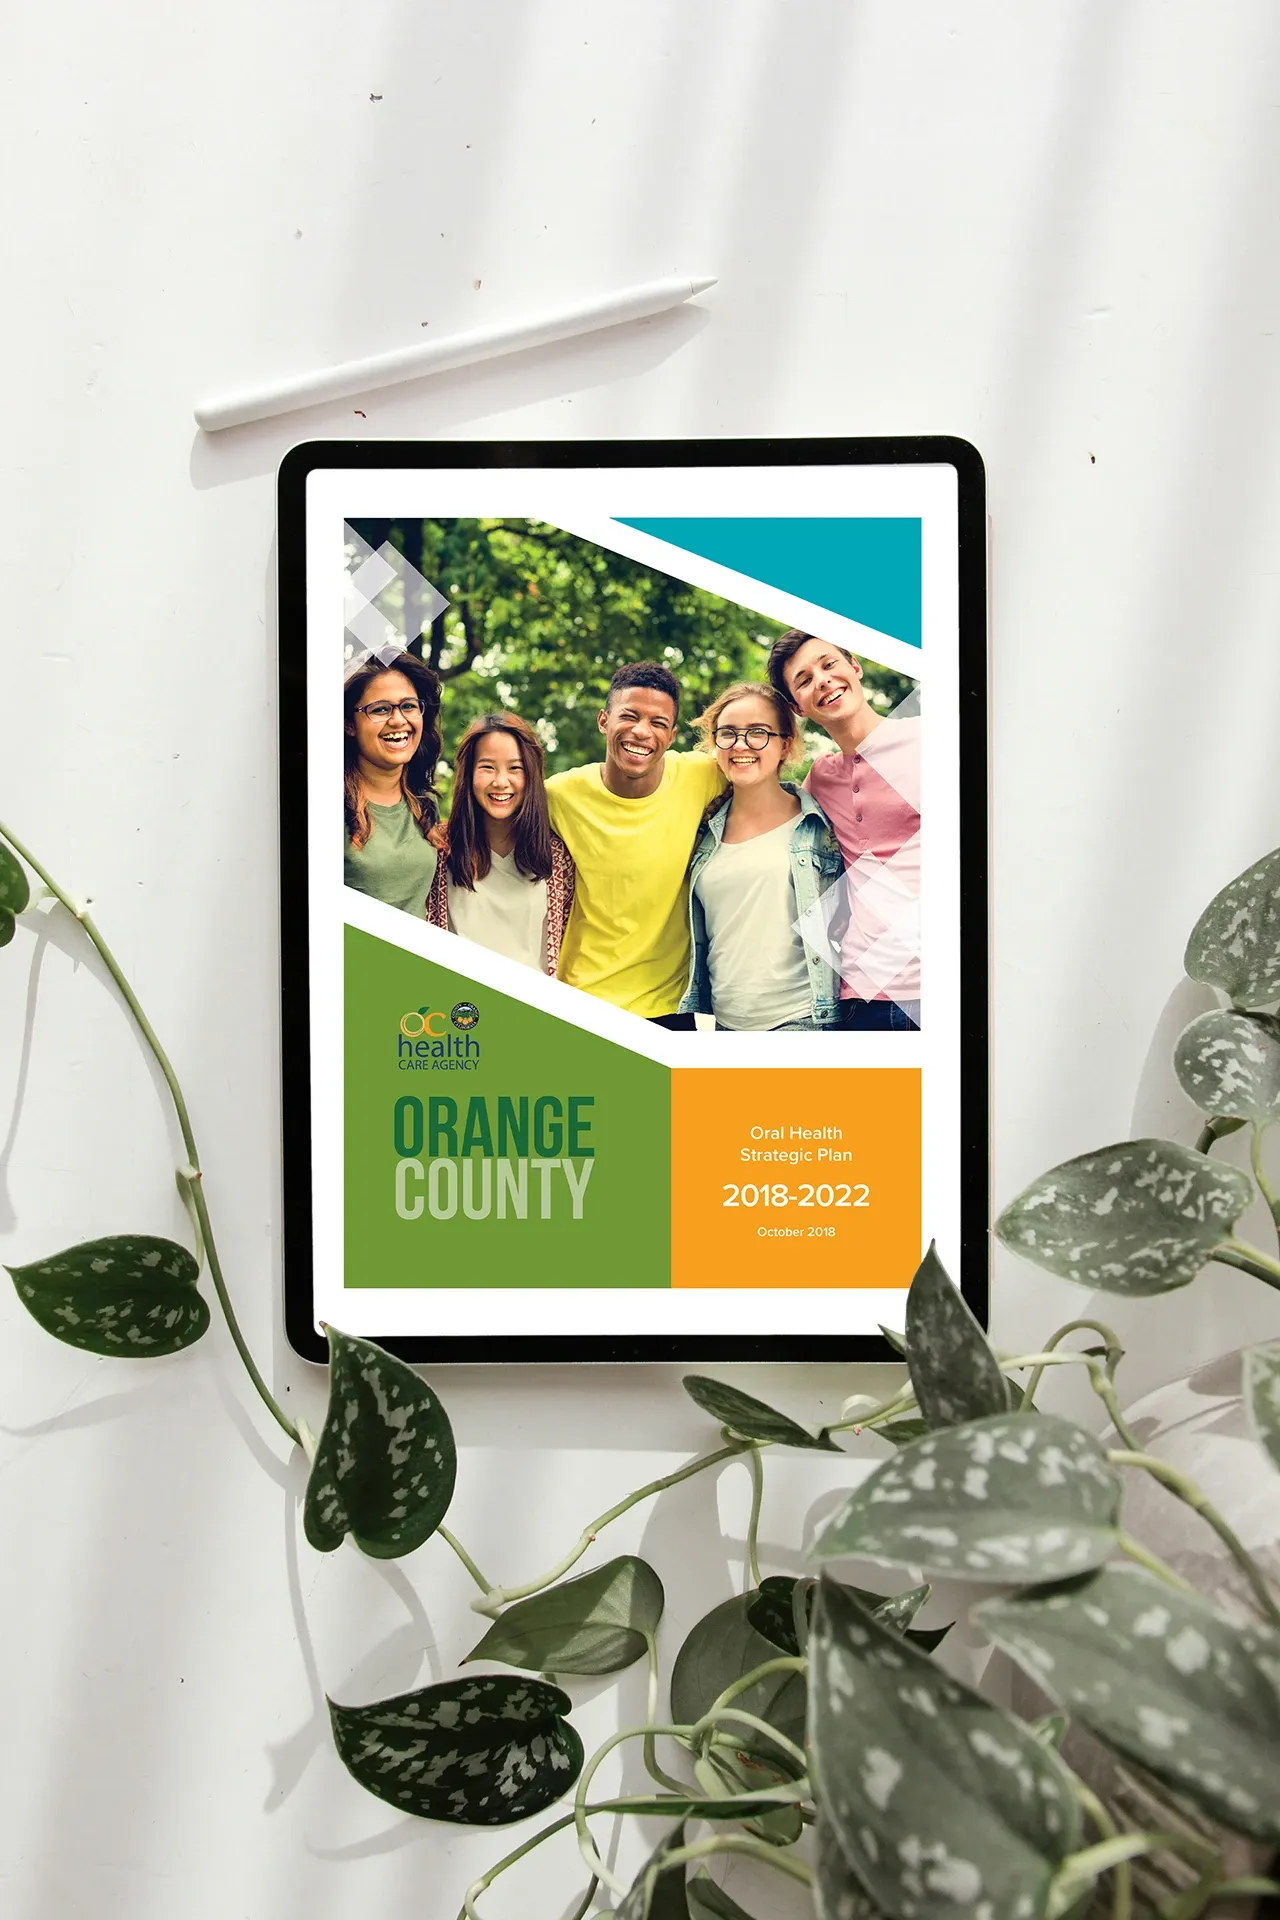 The front cover for the "Orange County Oral Health Strategic Plan 2018-2022" on a tablet display.